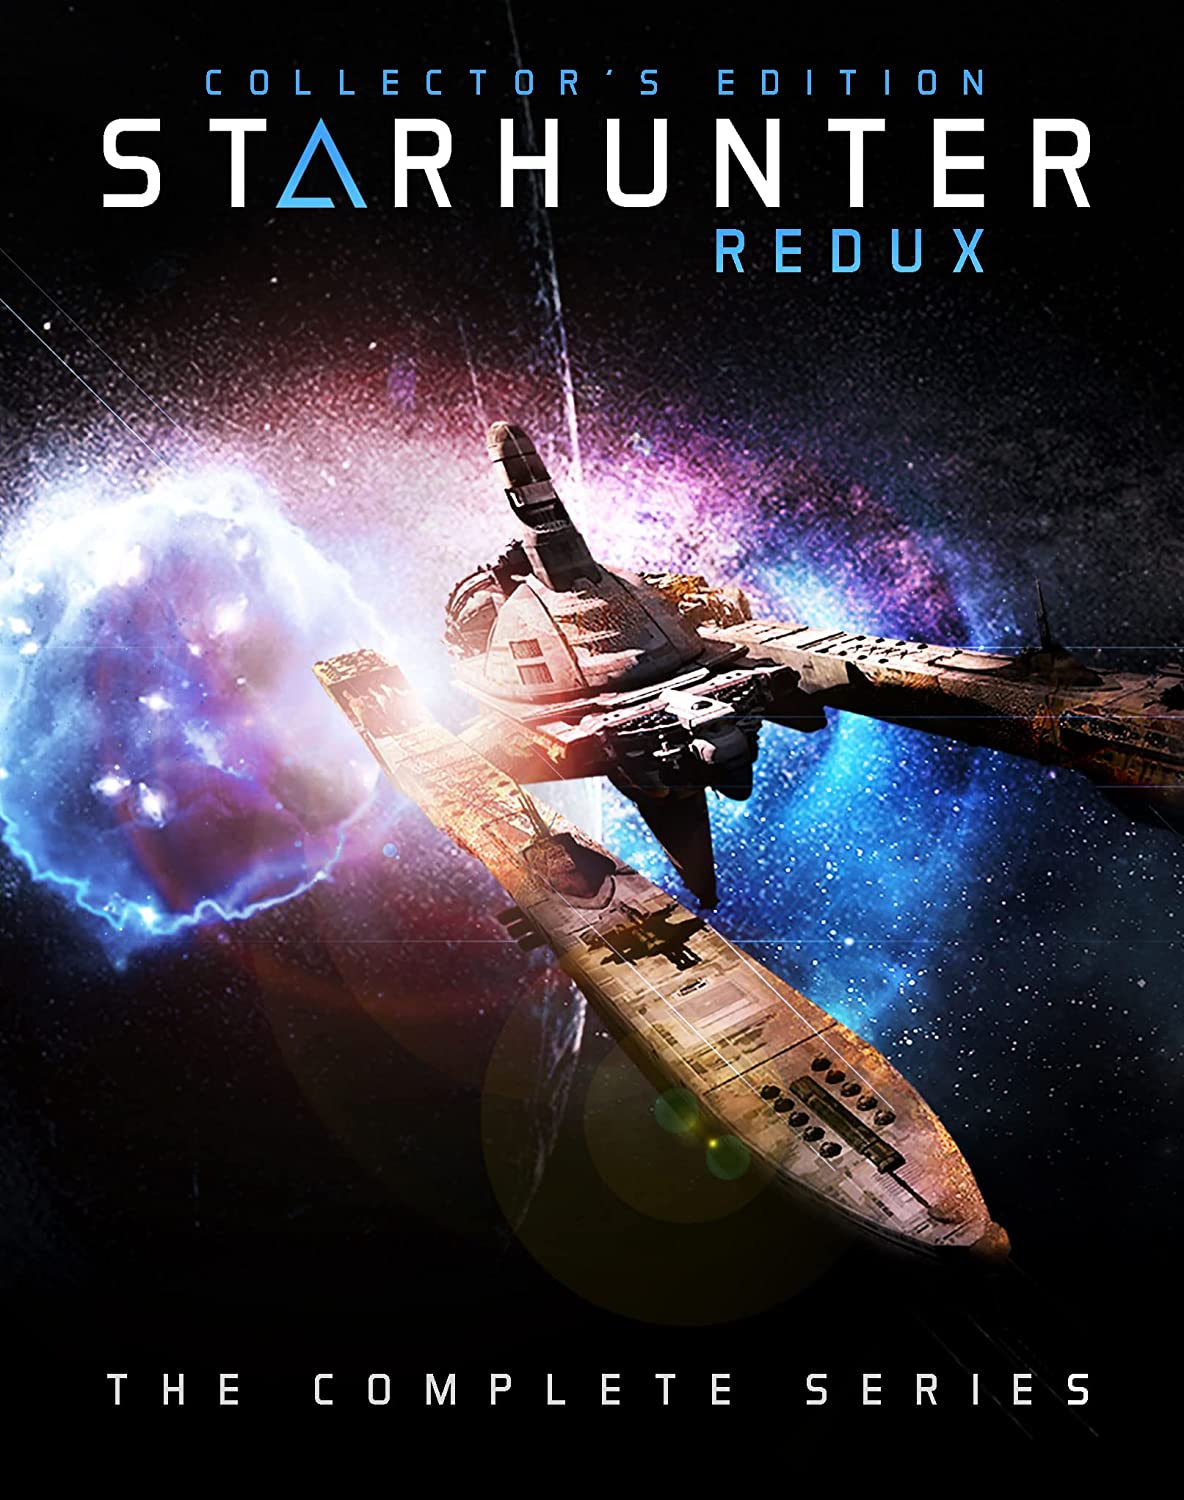 Starhunter Redux The Complete Series Collectors Edition To Make